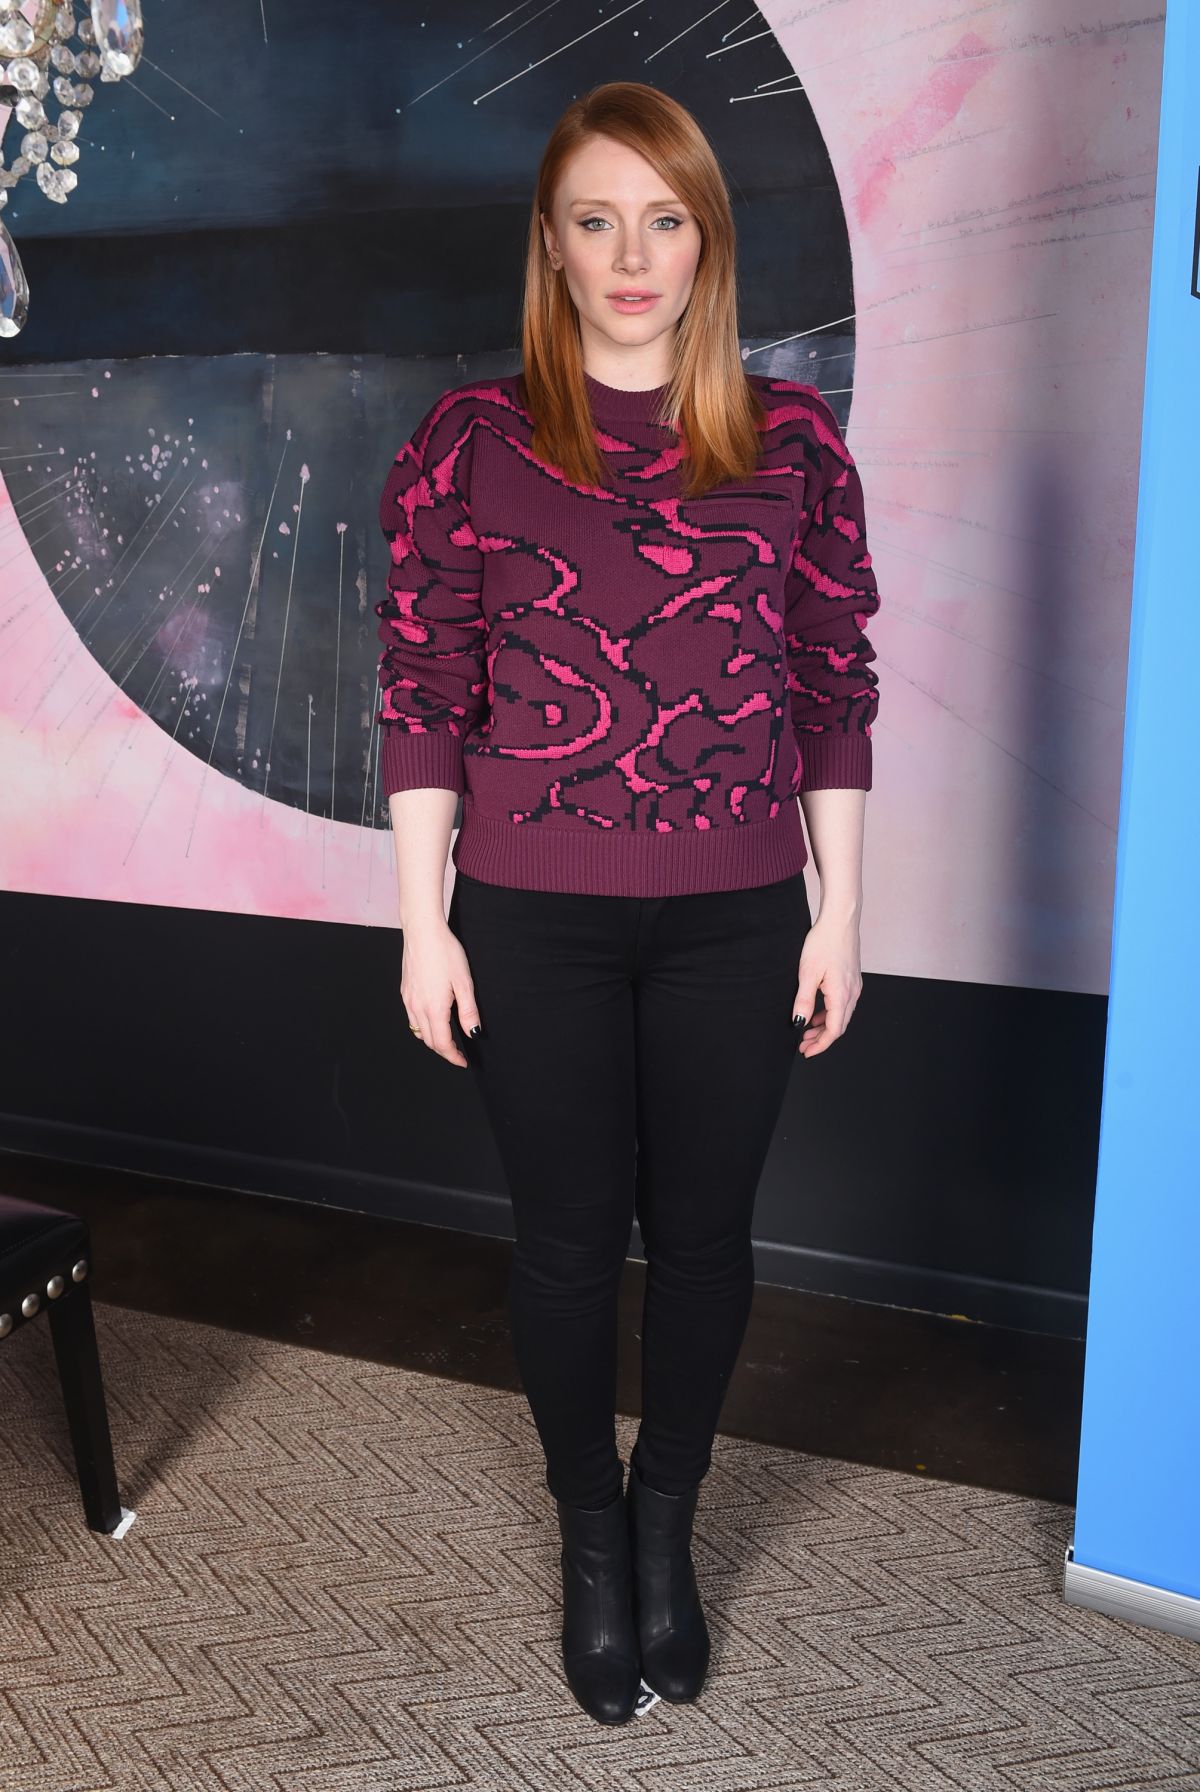 BRYCE DALLAS Howard at The Sag Indie Brunch for Directors in Park City ...